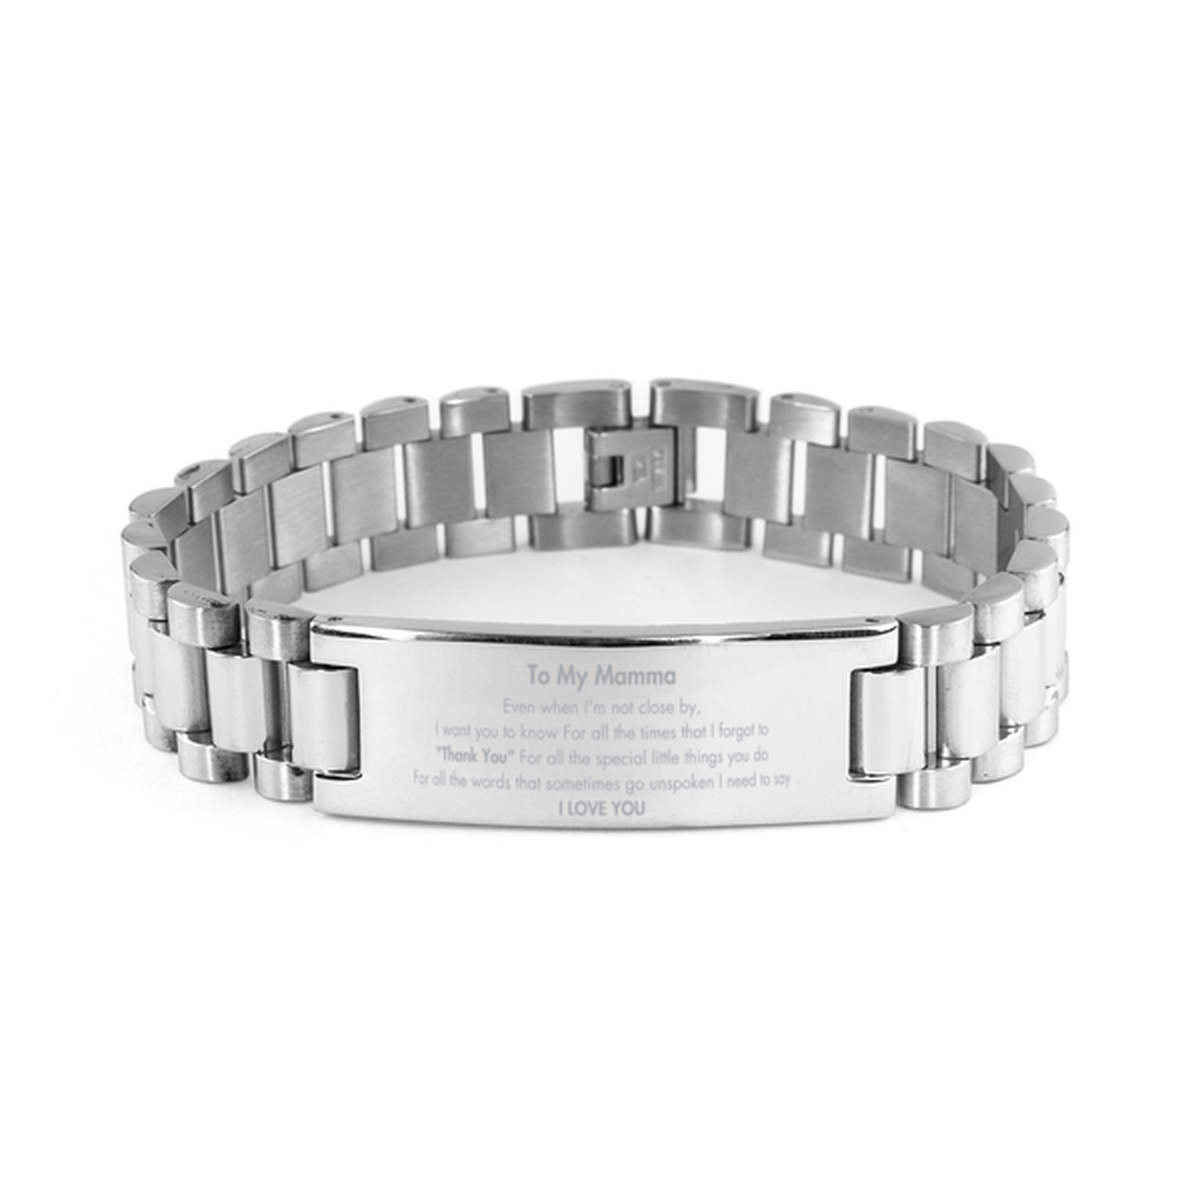 Thank You Gifts for Mamma, Keepsake Ladder Stainless Steel Bracelet Gifts for Mamma Birthday Mother's day Father's Day Mamma For all the words That sometimes go unspoken I need to say I LOVE YOU